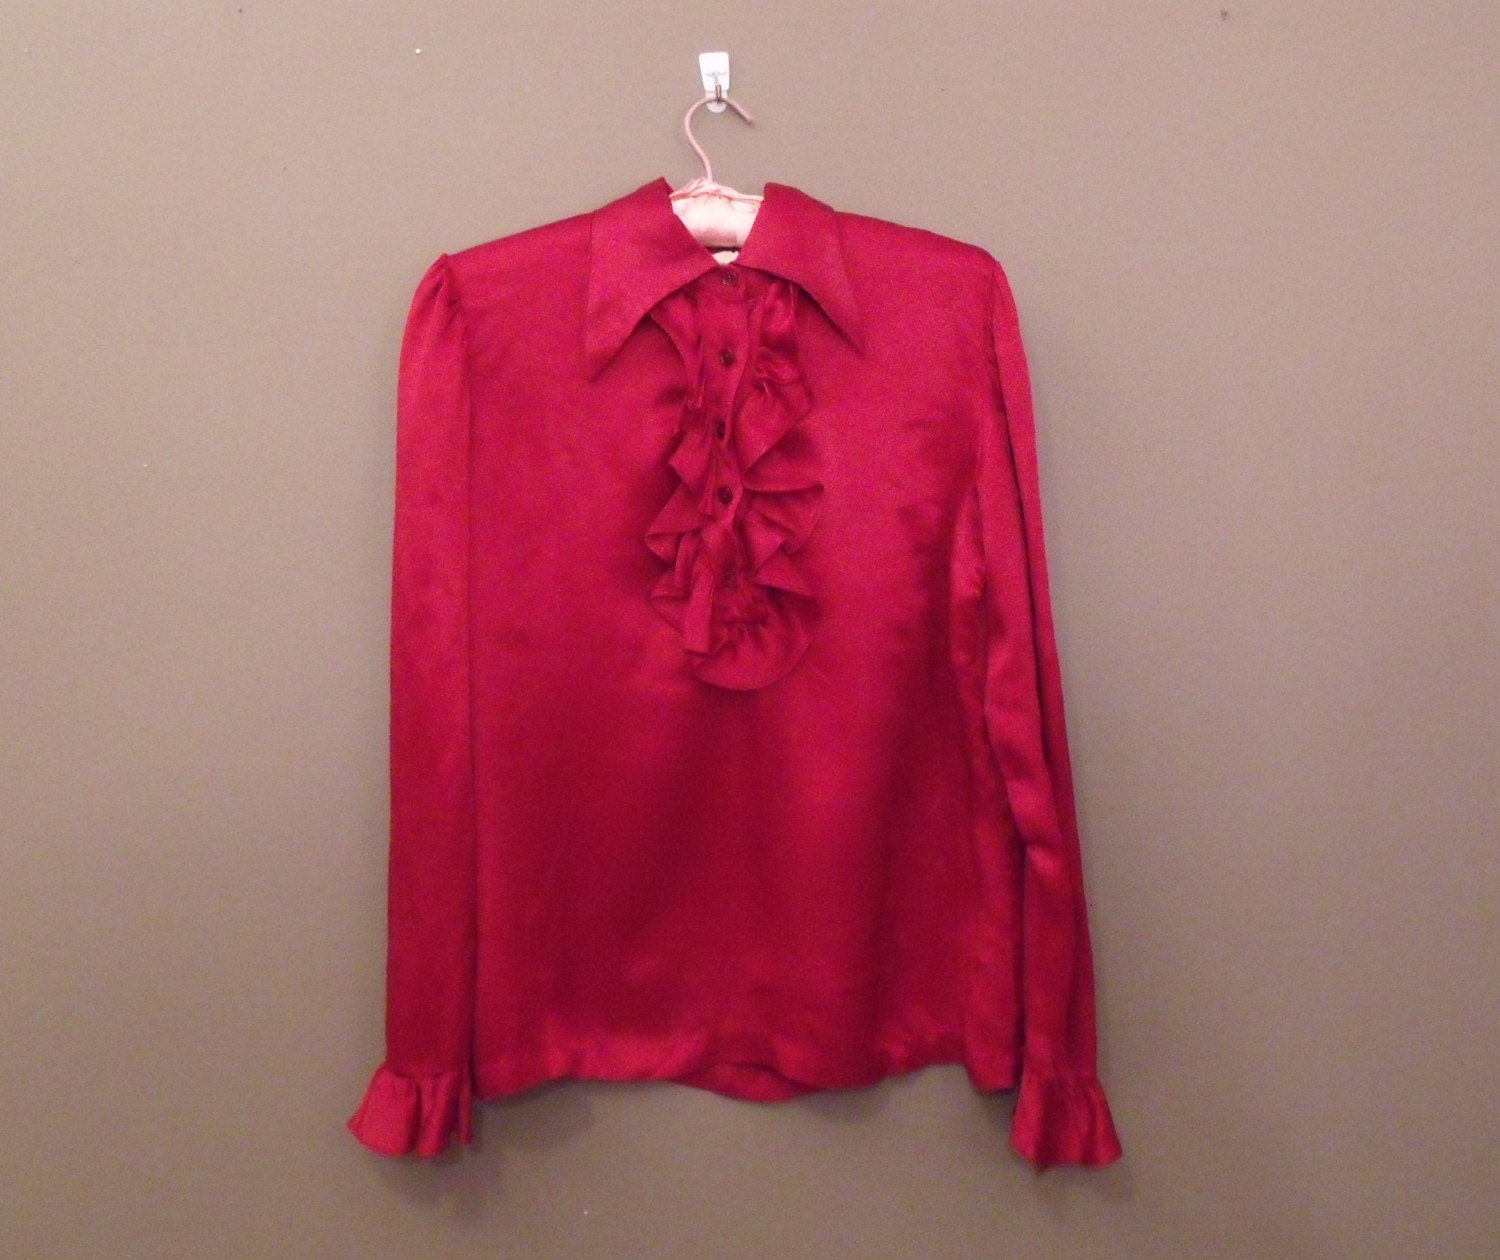 Vintage Ruby Red Satin Ruffled Blouse by SaltwaterTaffs on Etsy